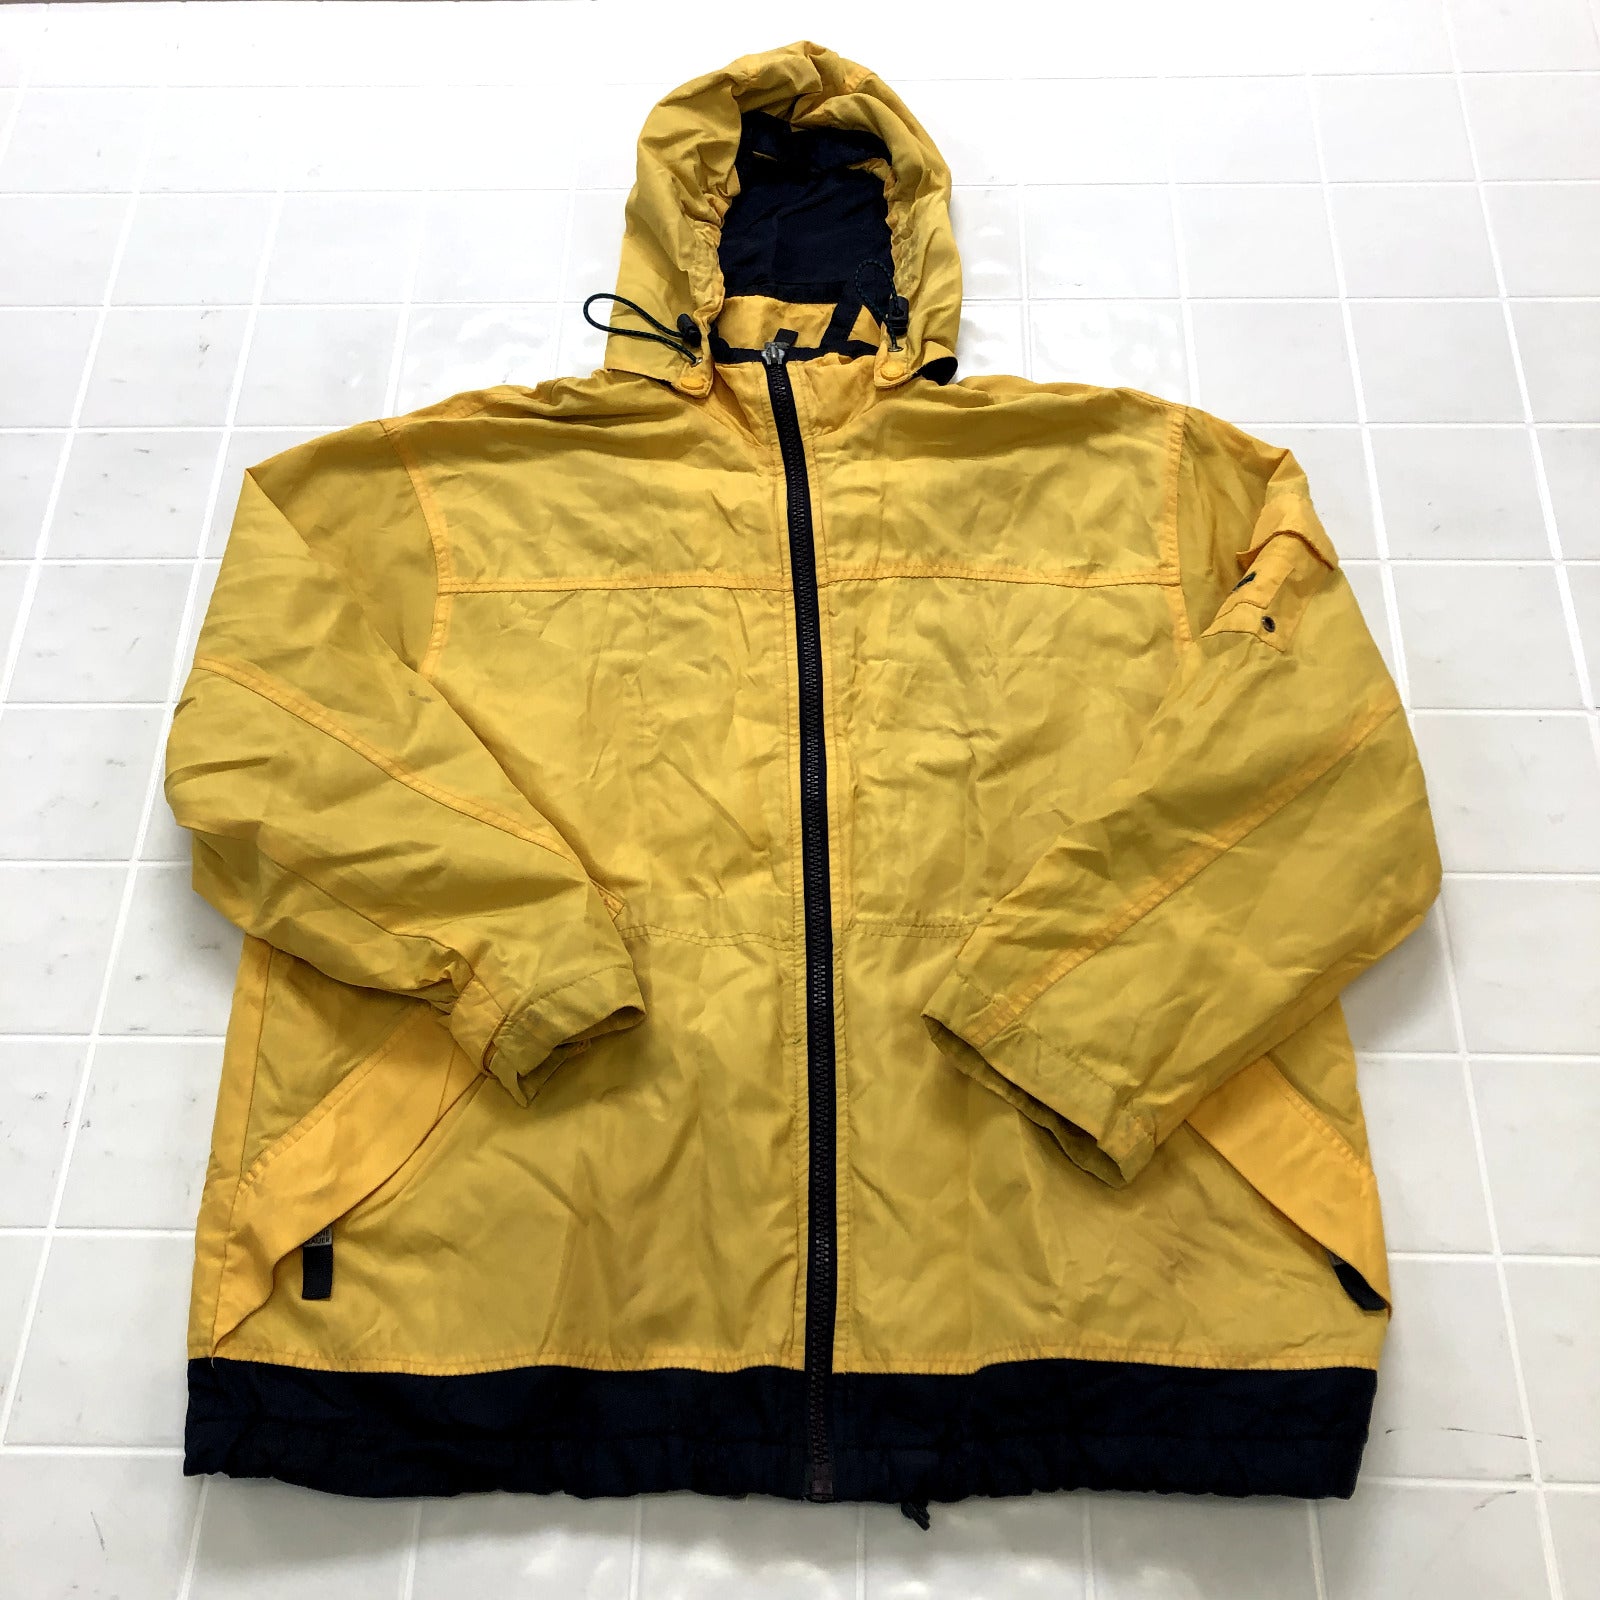 Retro Eddie Bauer Yellow Lined Regular Fit Hooded Nylon Jacket Adult Size M